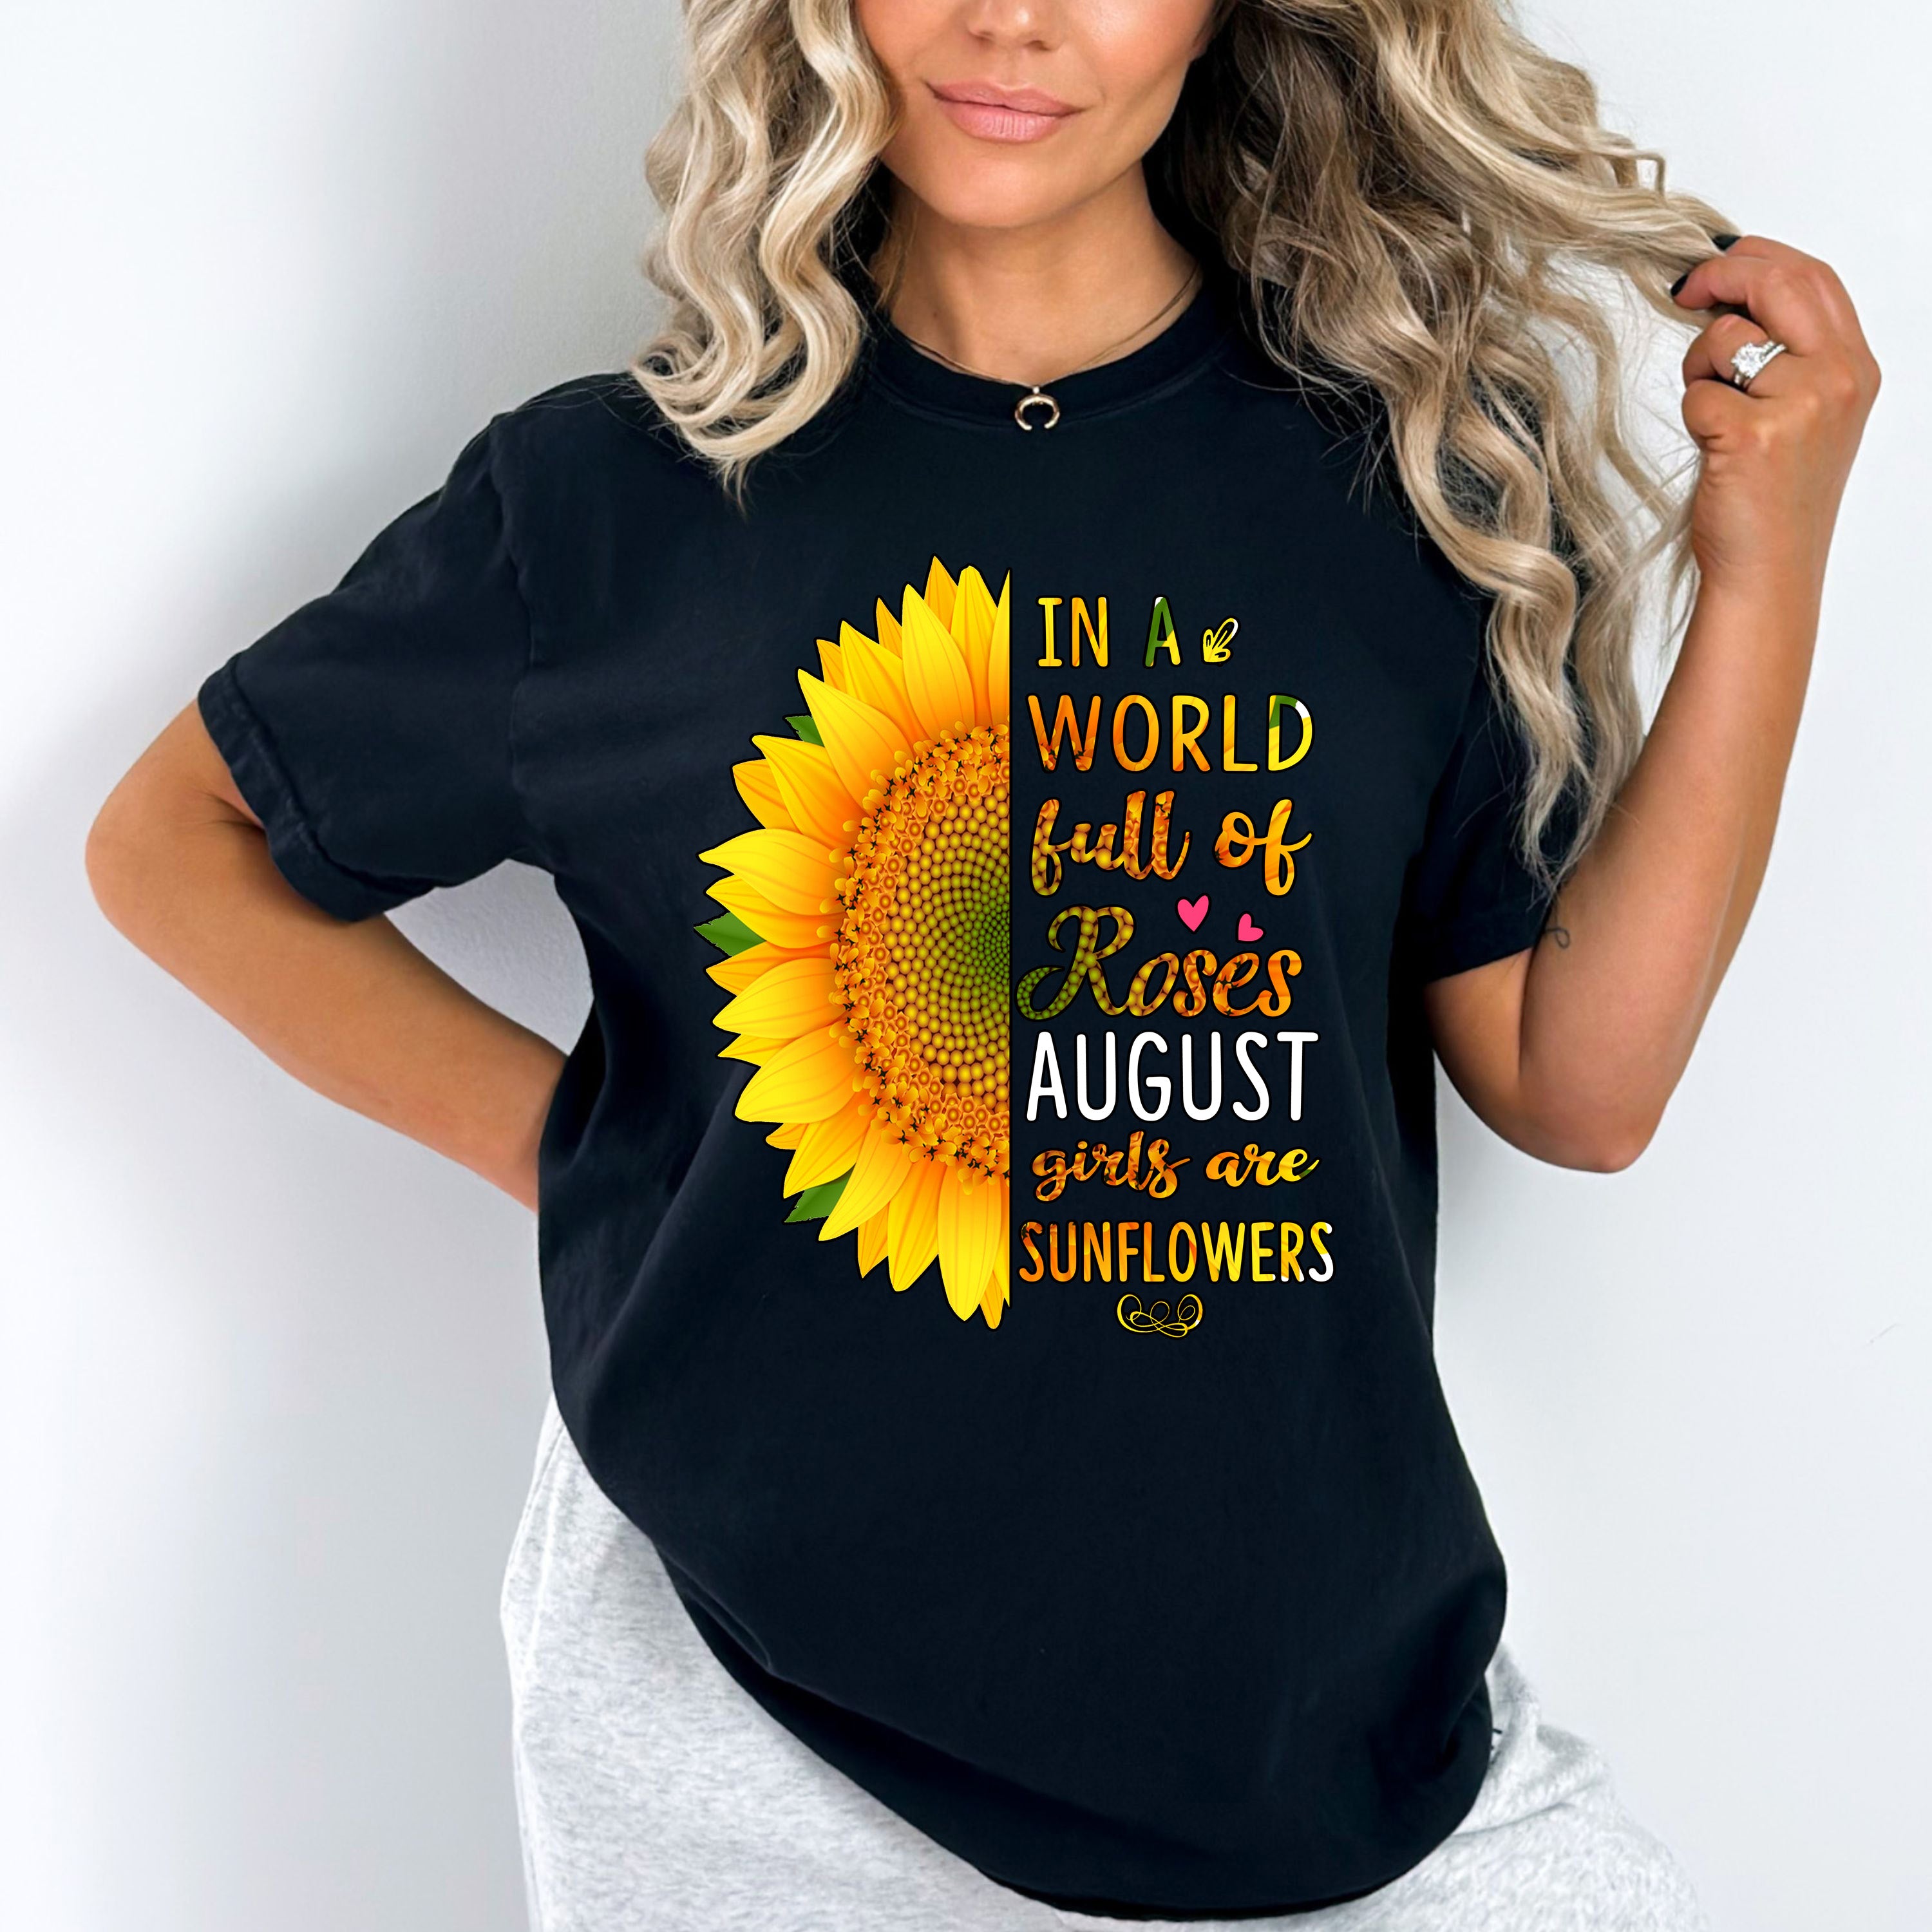 "In A World Full Of Roses August Girls are Sunflowers"